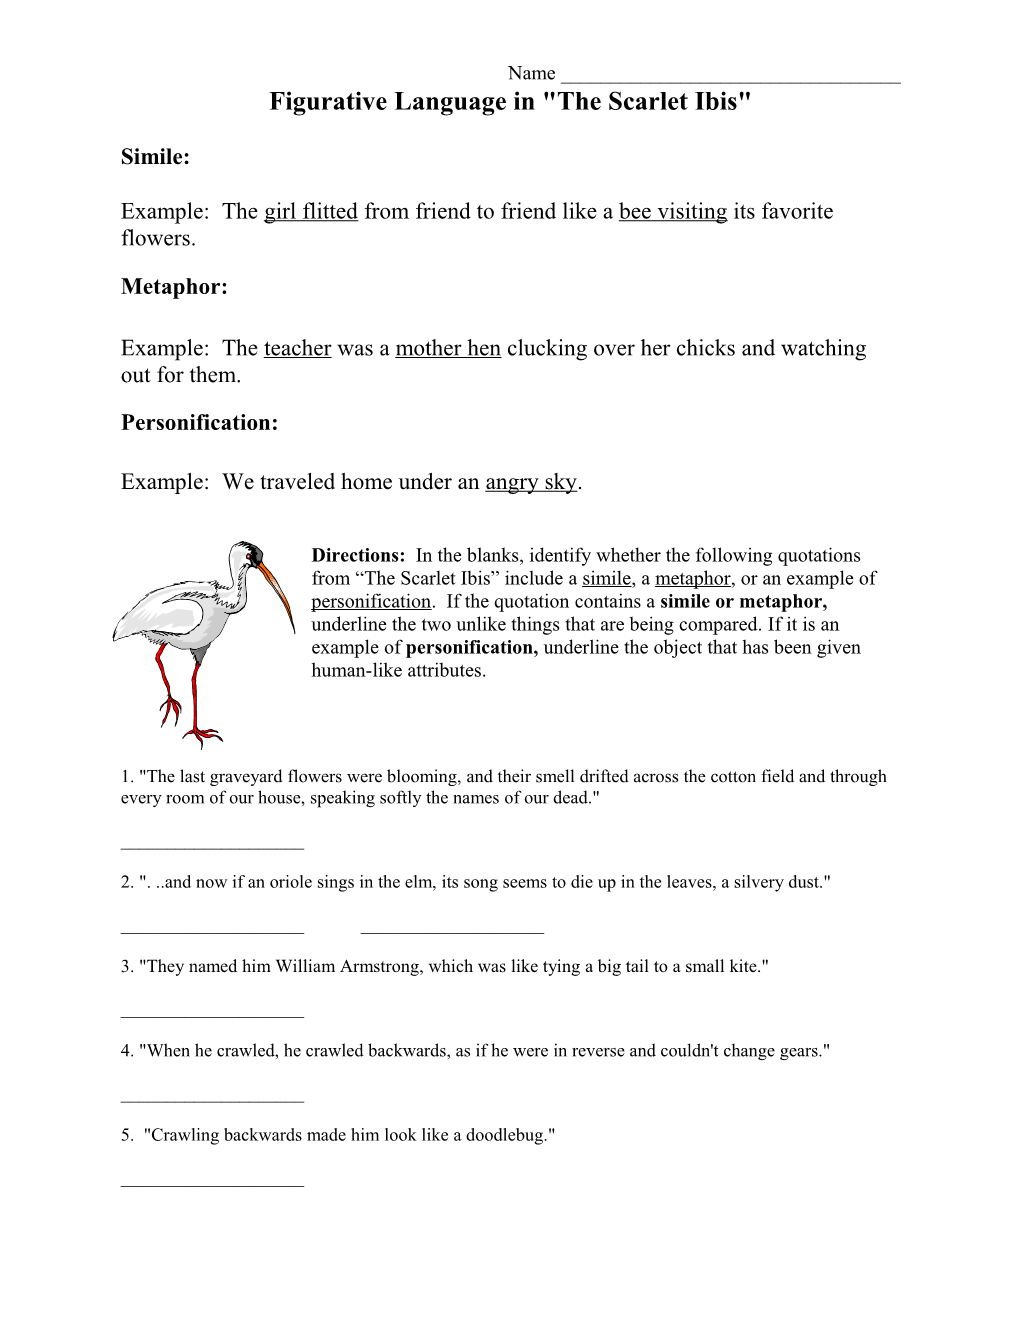 Figurative Language and the Scarlet Ibis